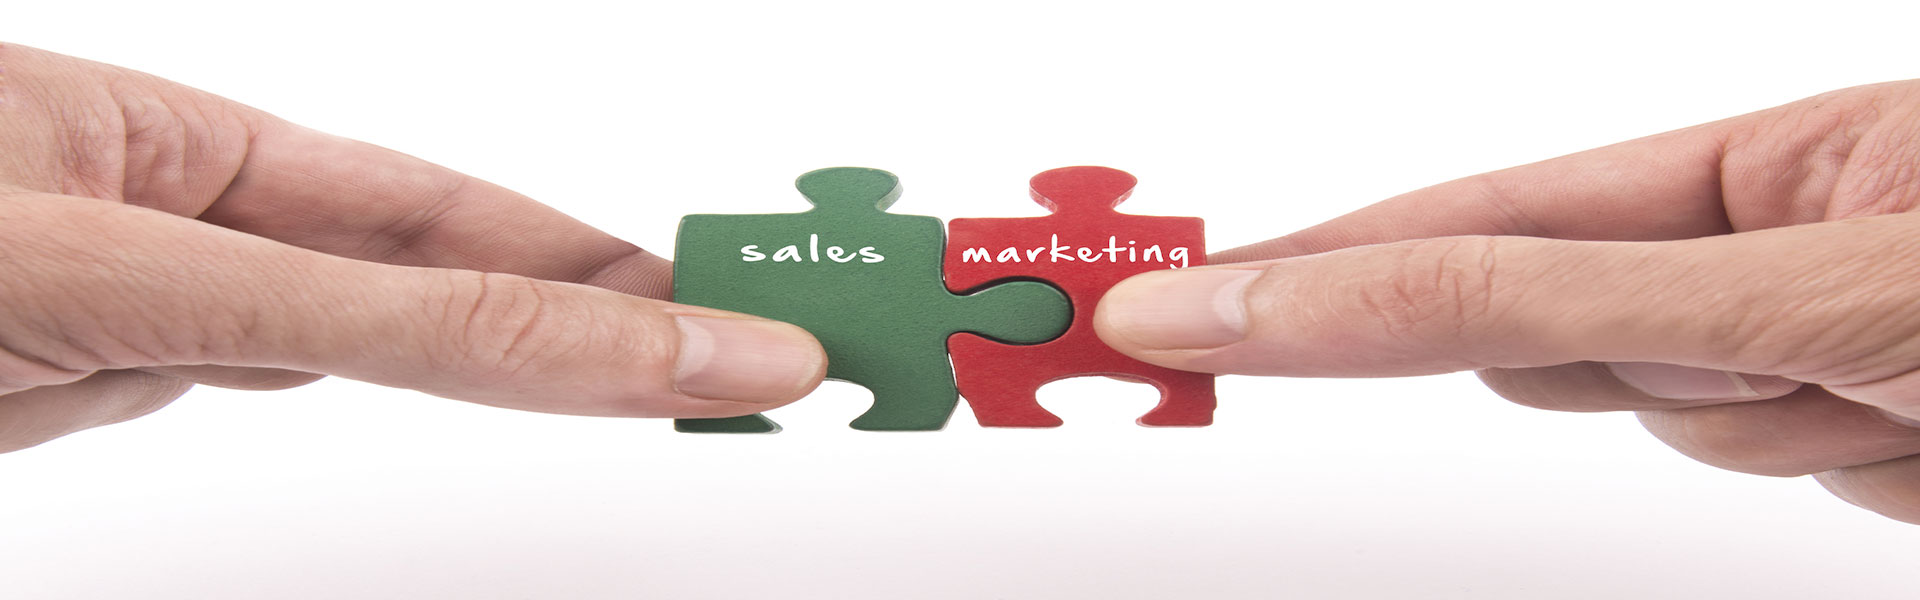 6-Ways-Sales-And-Marketing-Can-Align-With-Customers-And-Grow-Revenue